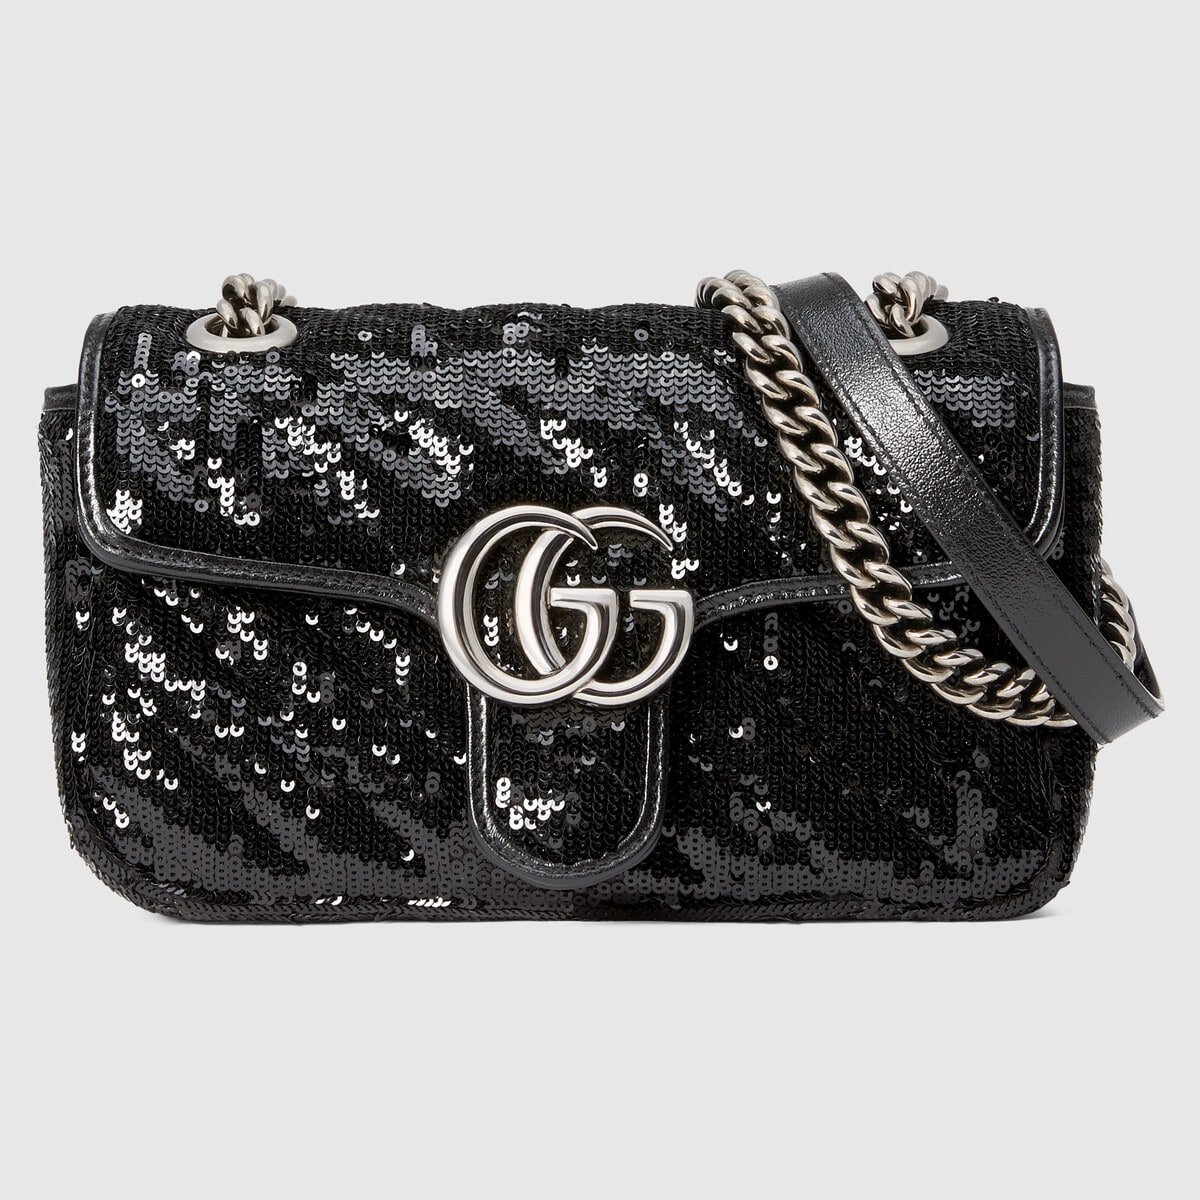 GG MARMONT SEQUIN BAG